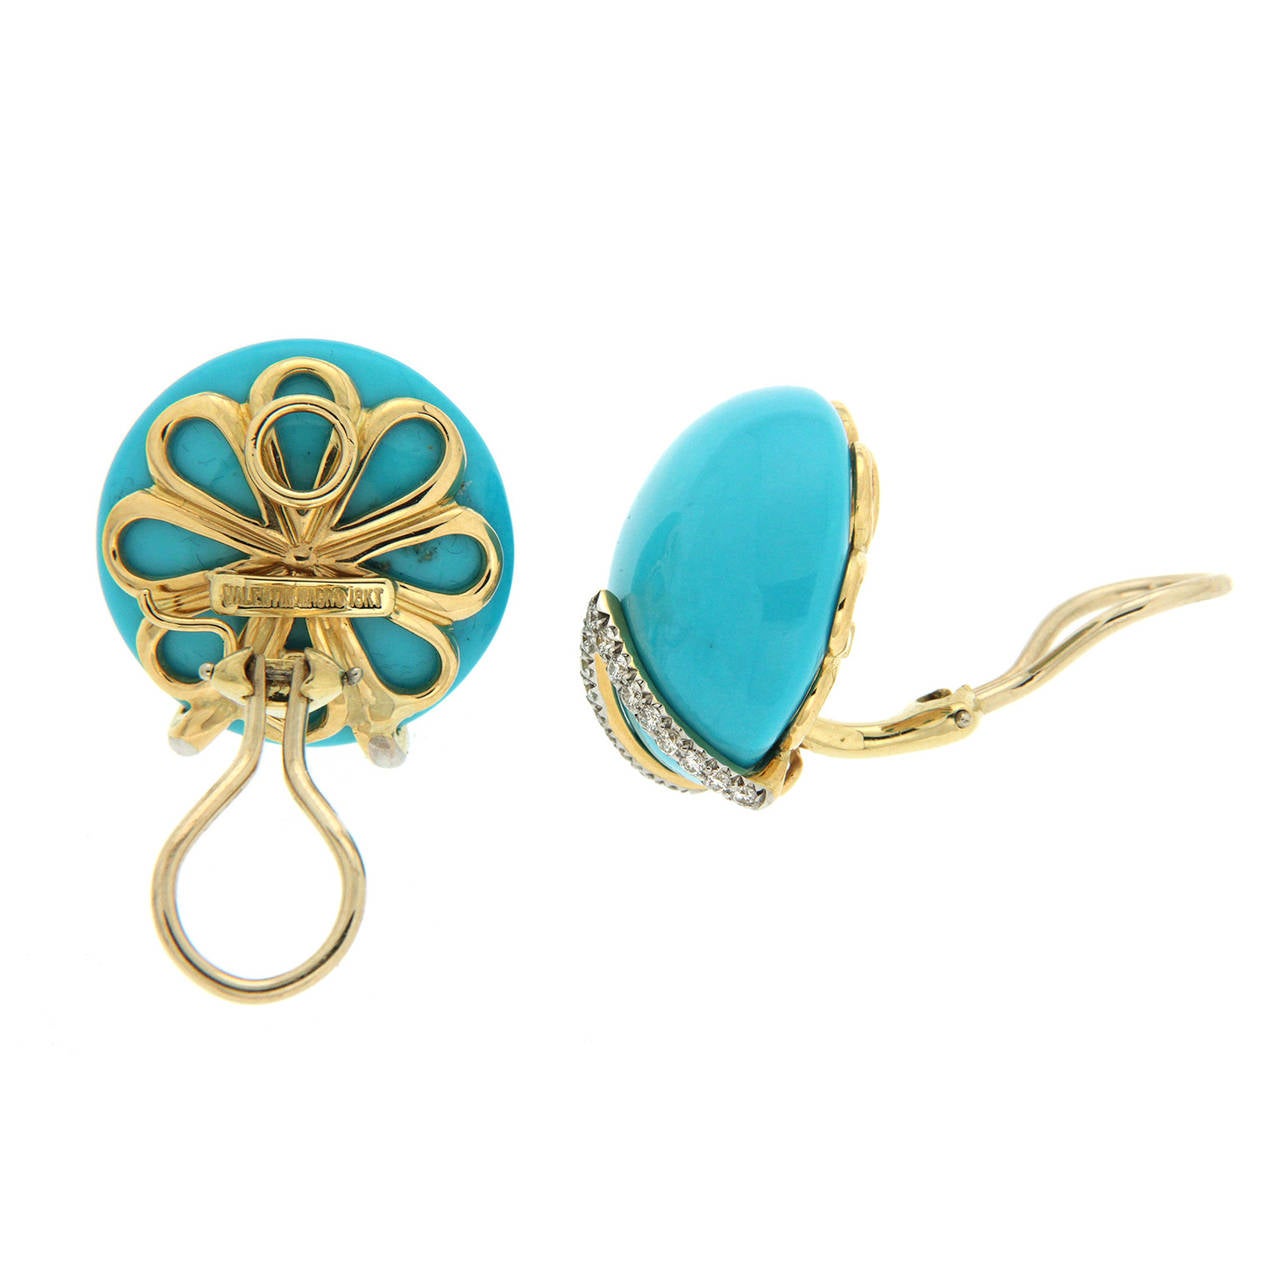 These very stylish Valentin Magro earrings are made in 18kt yellow gold they feature round turquoise measuring 19x19mm and 0.50 carat total weight of round brilliant diamonds which are selected with the finest quality (D.E.F color and VVS clarity),